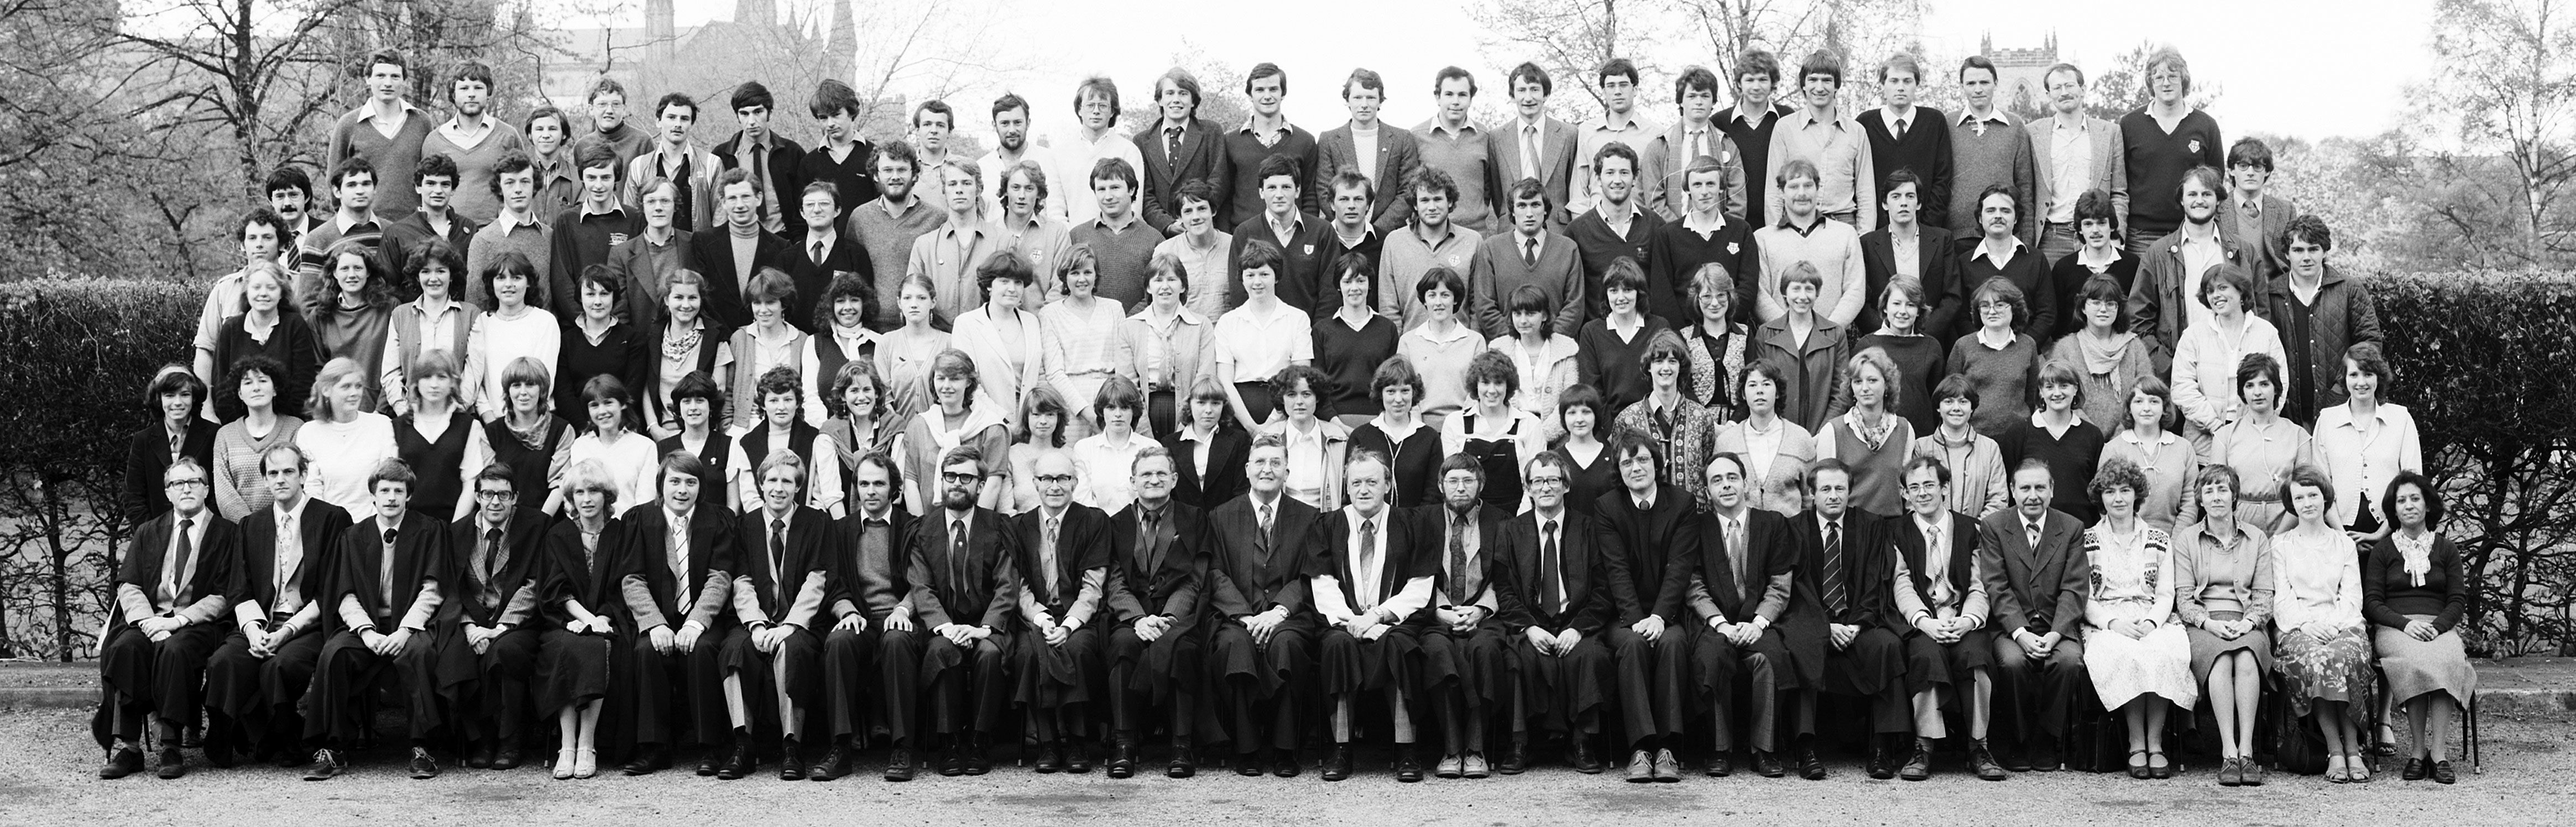 Geography Department Undergraduate Group photo from 1981